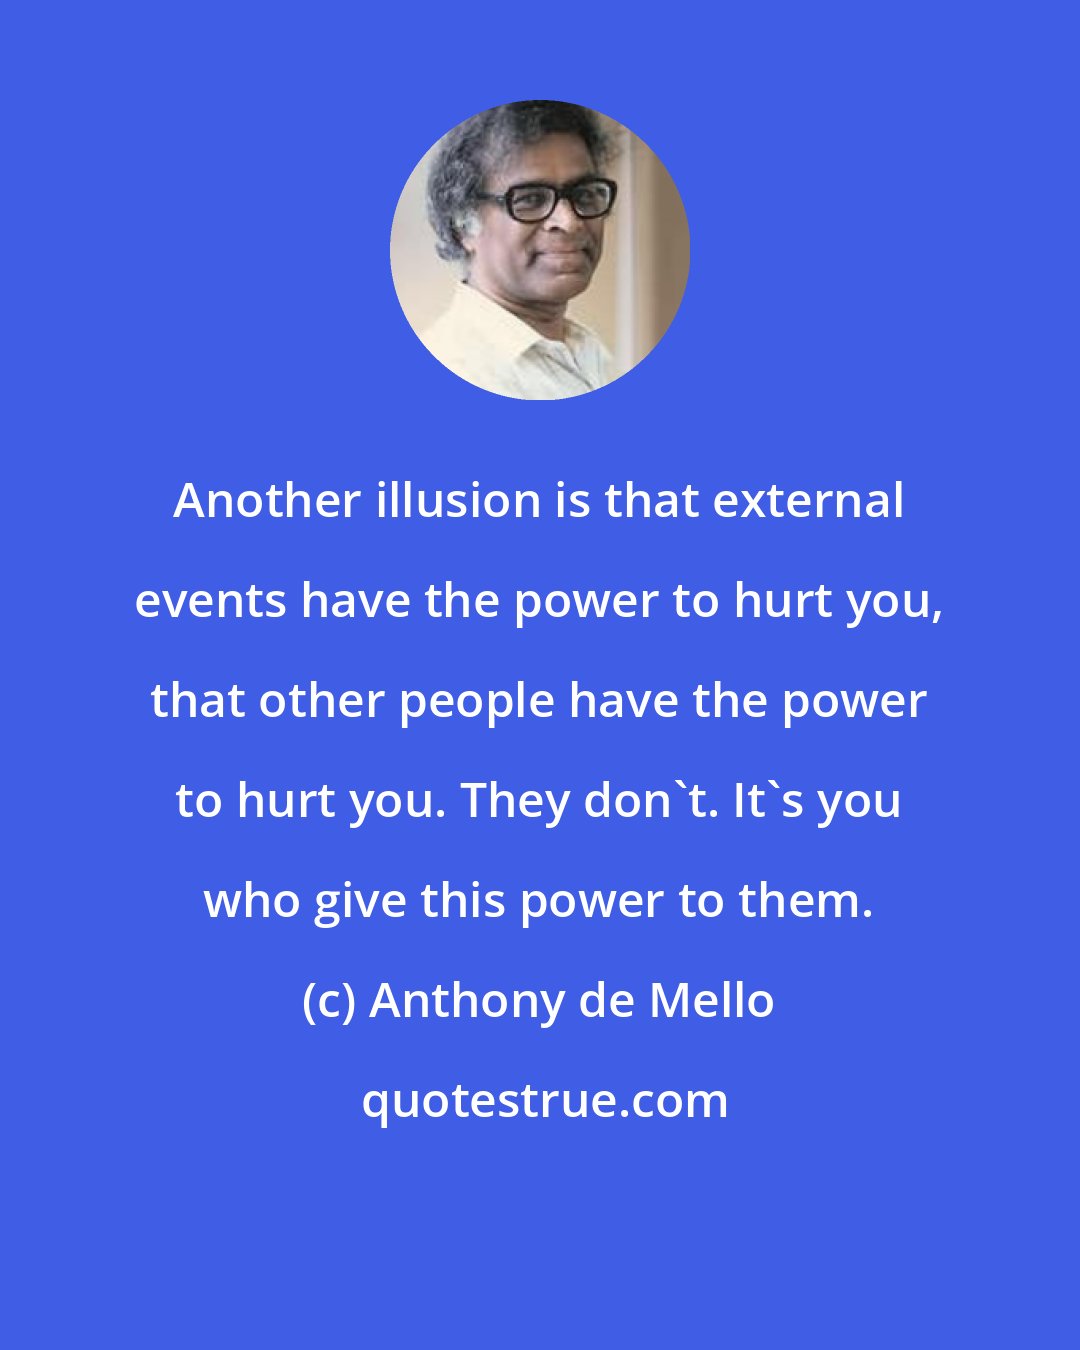 Anthony de Mello: Another illusion is that external events have the power to hurt you, that other people have the power to hurt you. They don't. It's you who give this power to them.